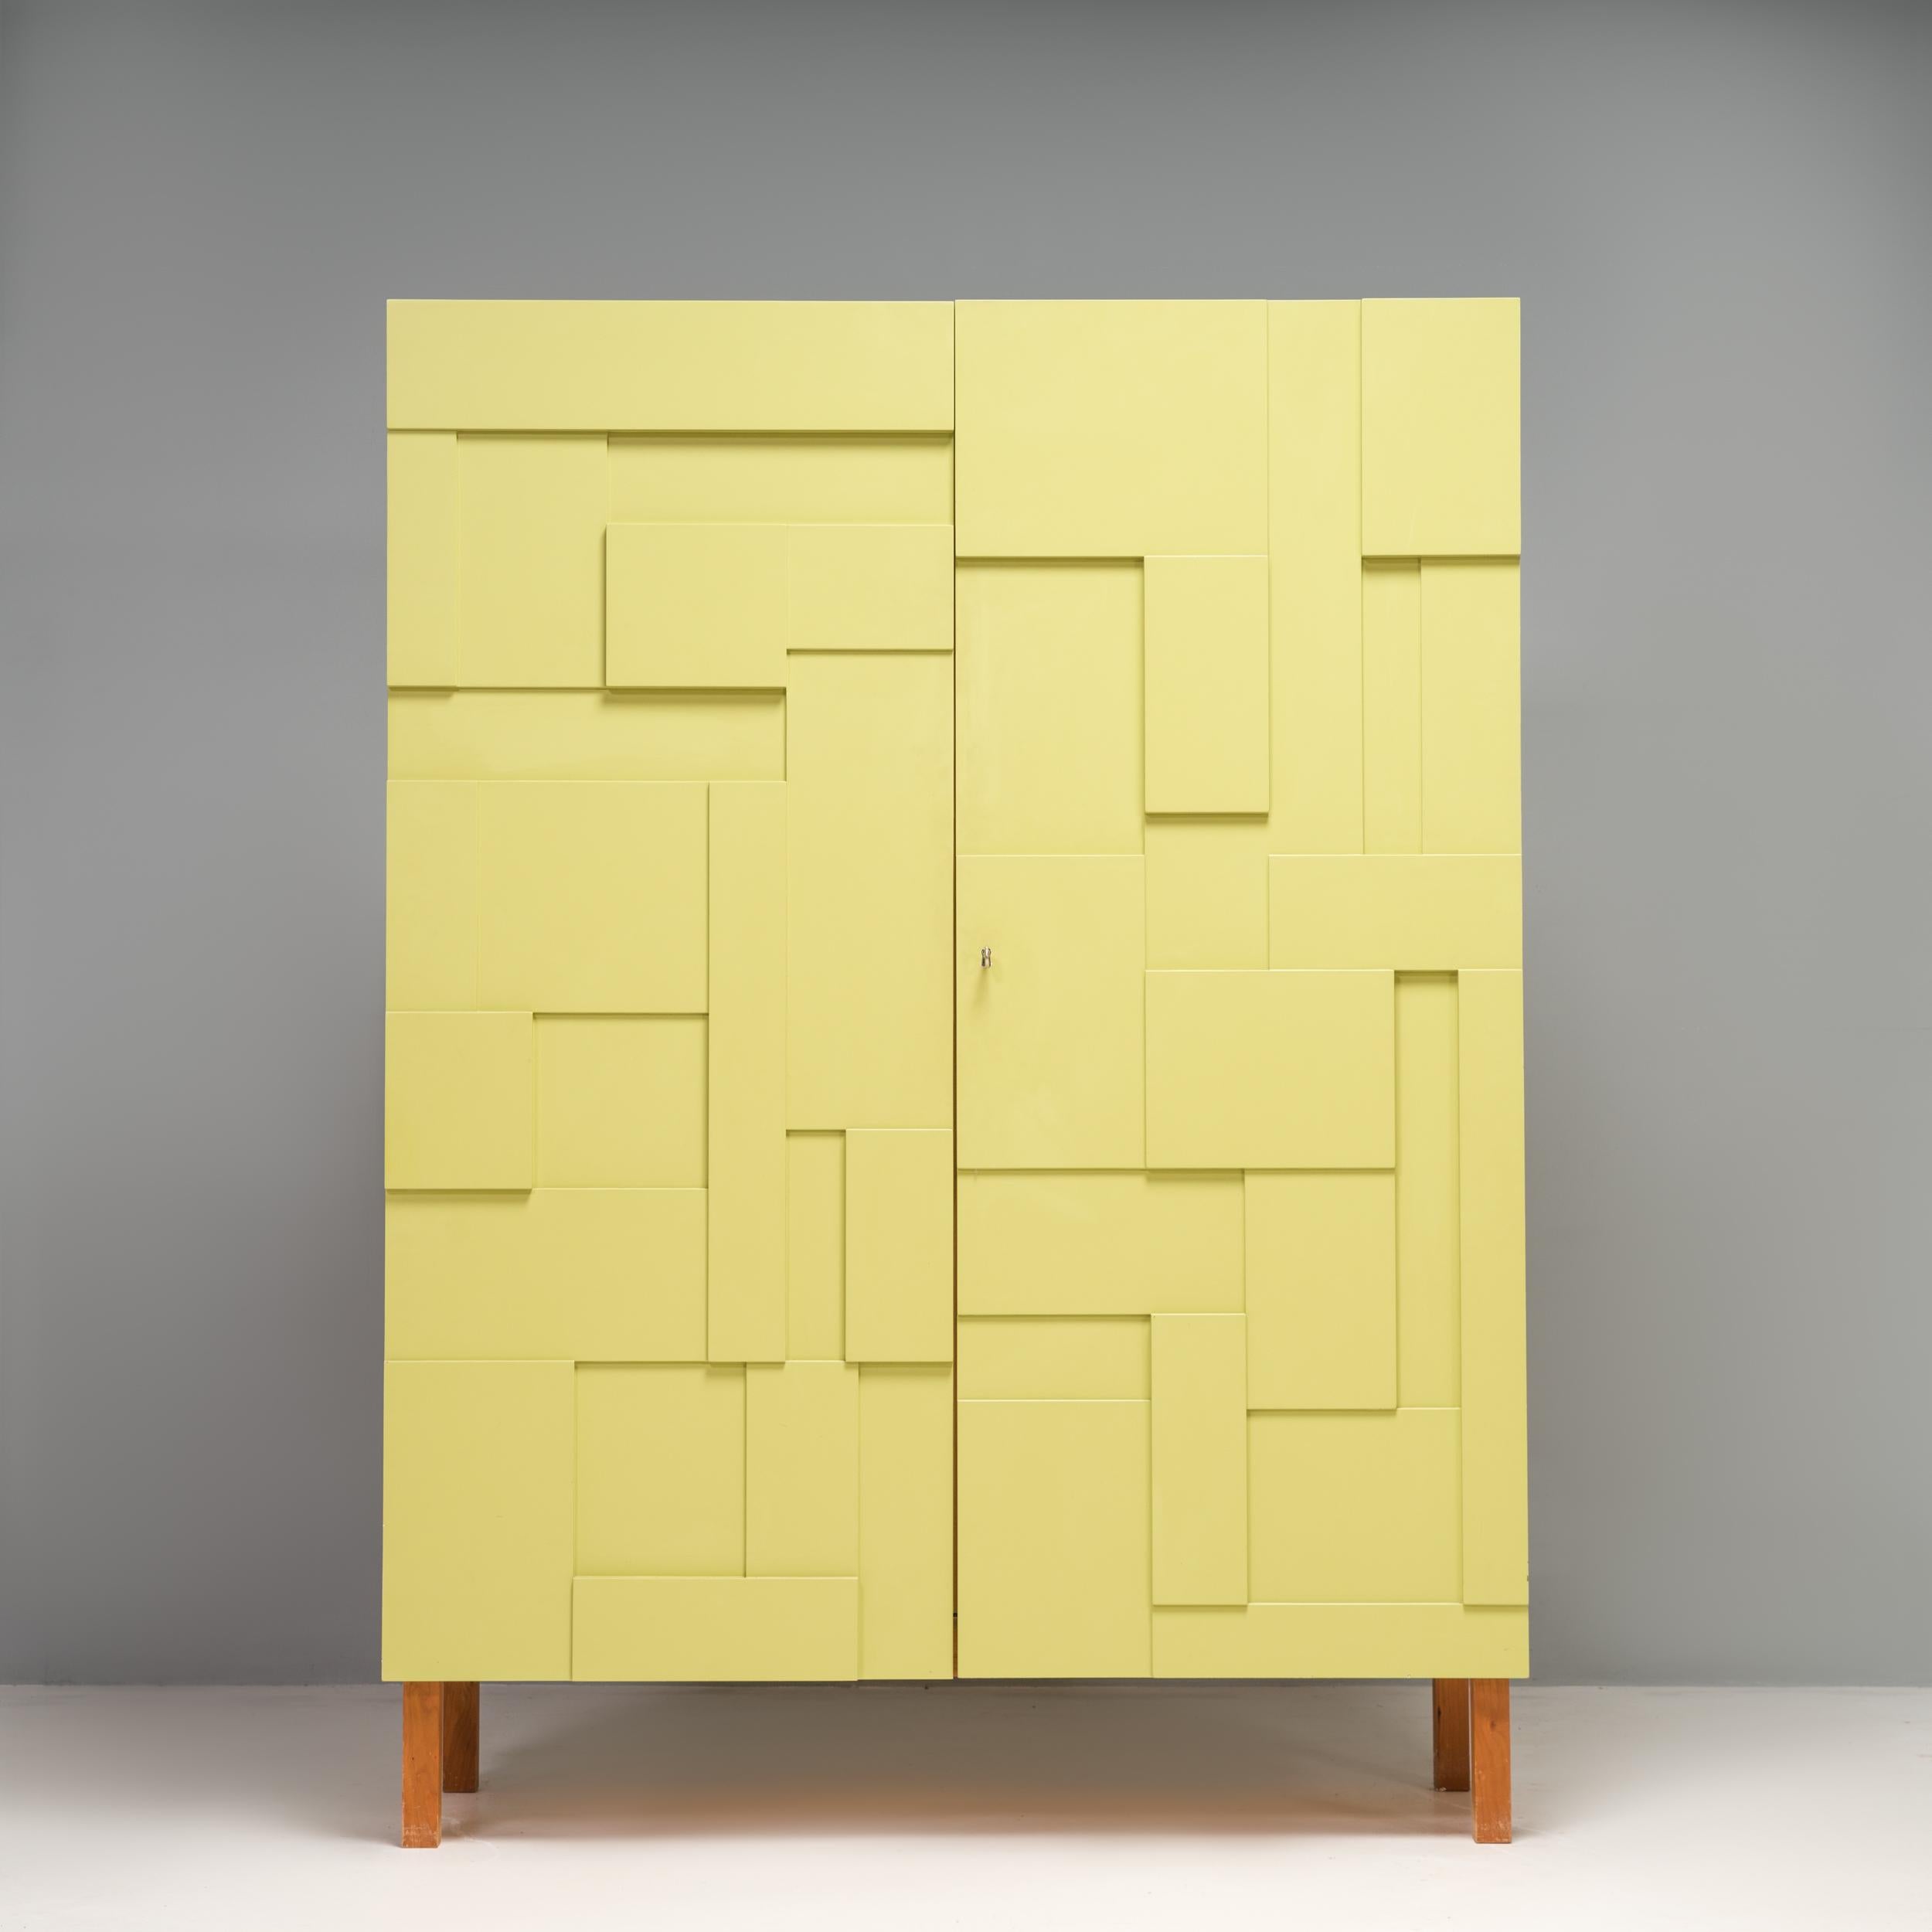 Designed by Pinch and manufactured in Essex, the Alba armoire is a fantastic example of locally crafted British design.

Inspired by a Ben Nicholson relief artwork, the front of the armoire features panelled doors, with four levels of intricately